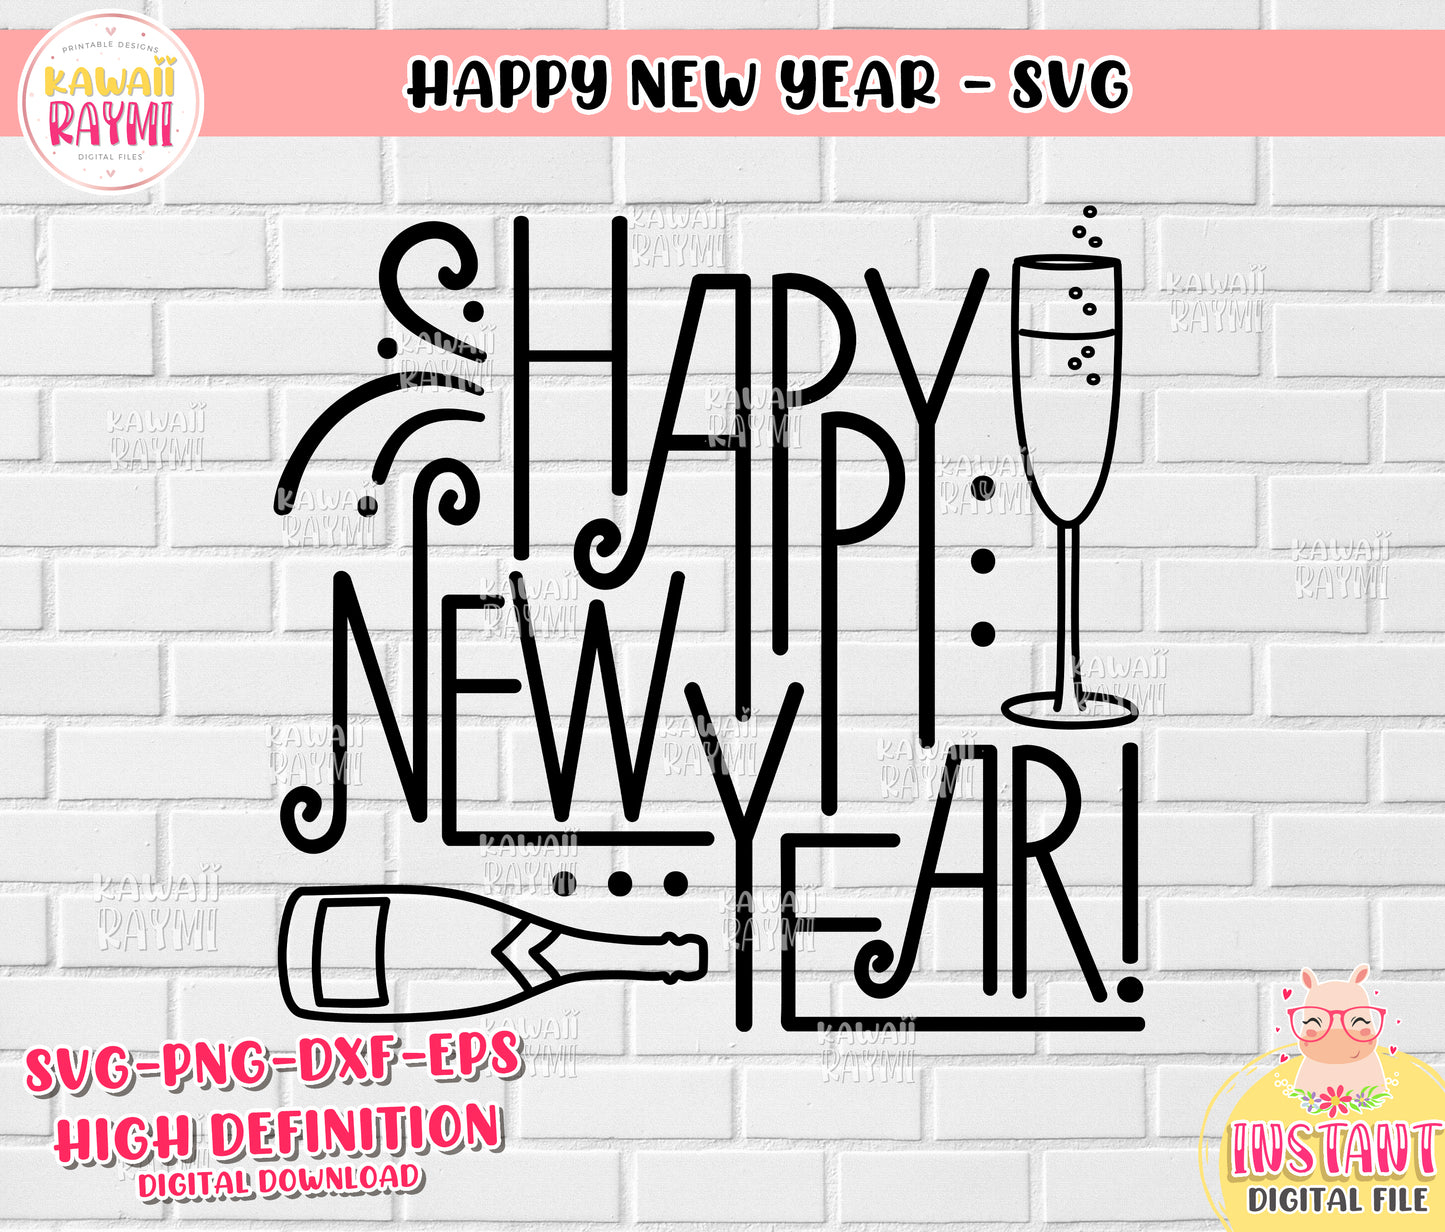 Happy new year svg, cricut, cut file, instant download